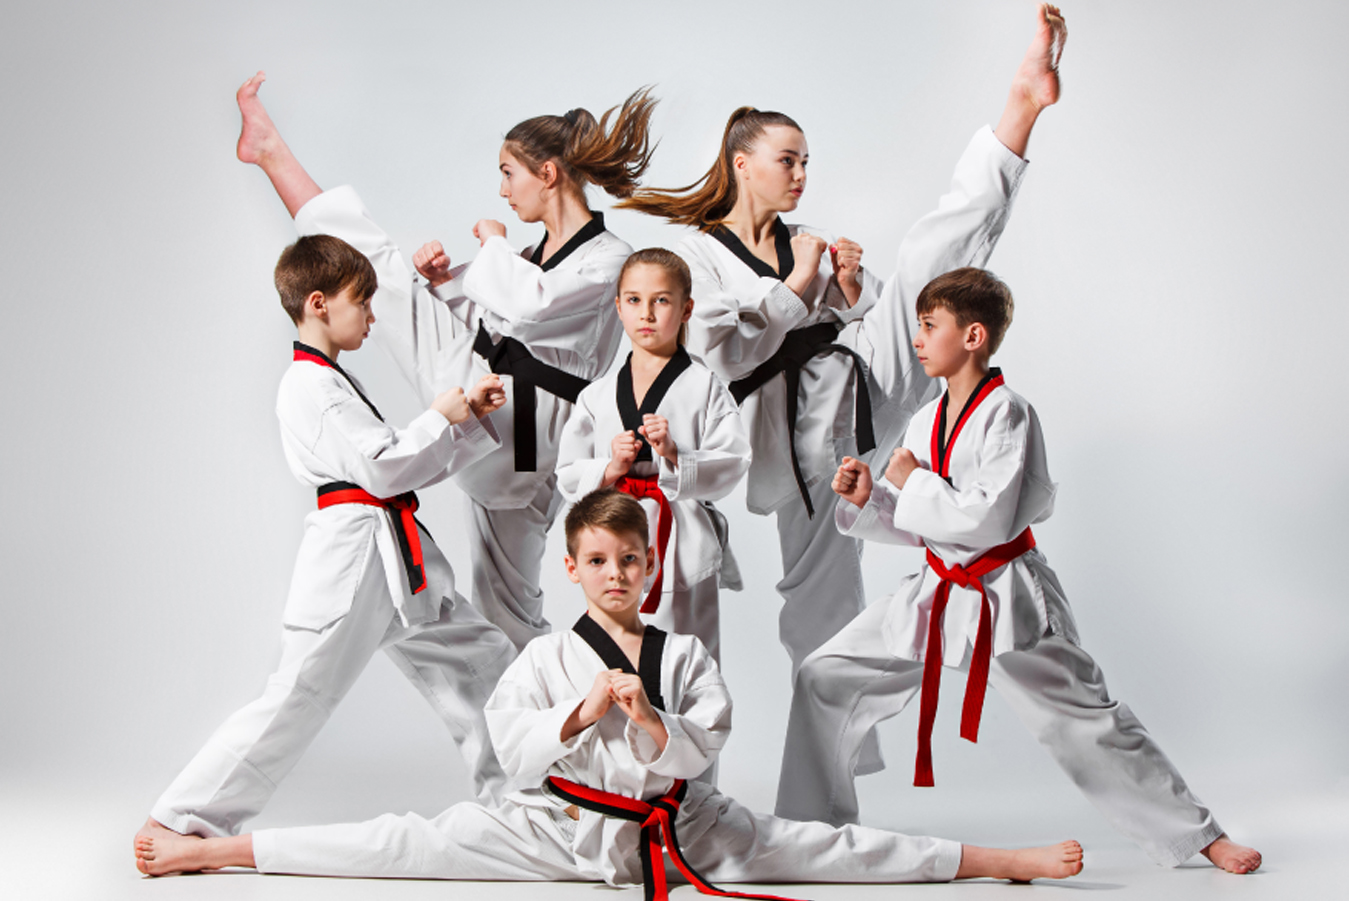 Should Christians Think Twice About Martial Arts?